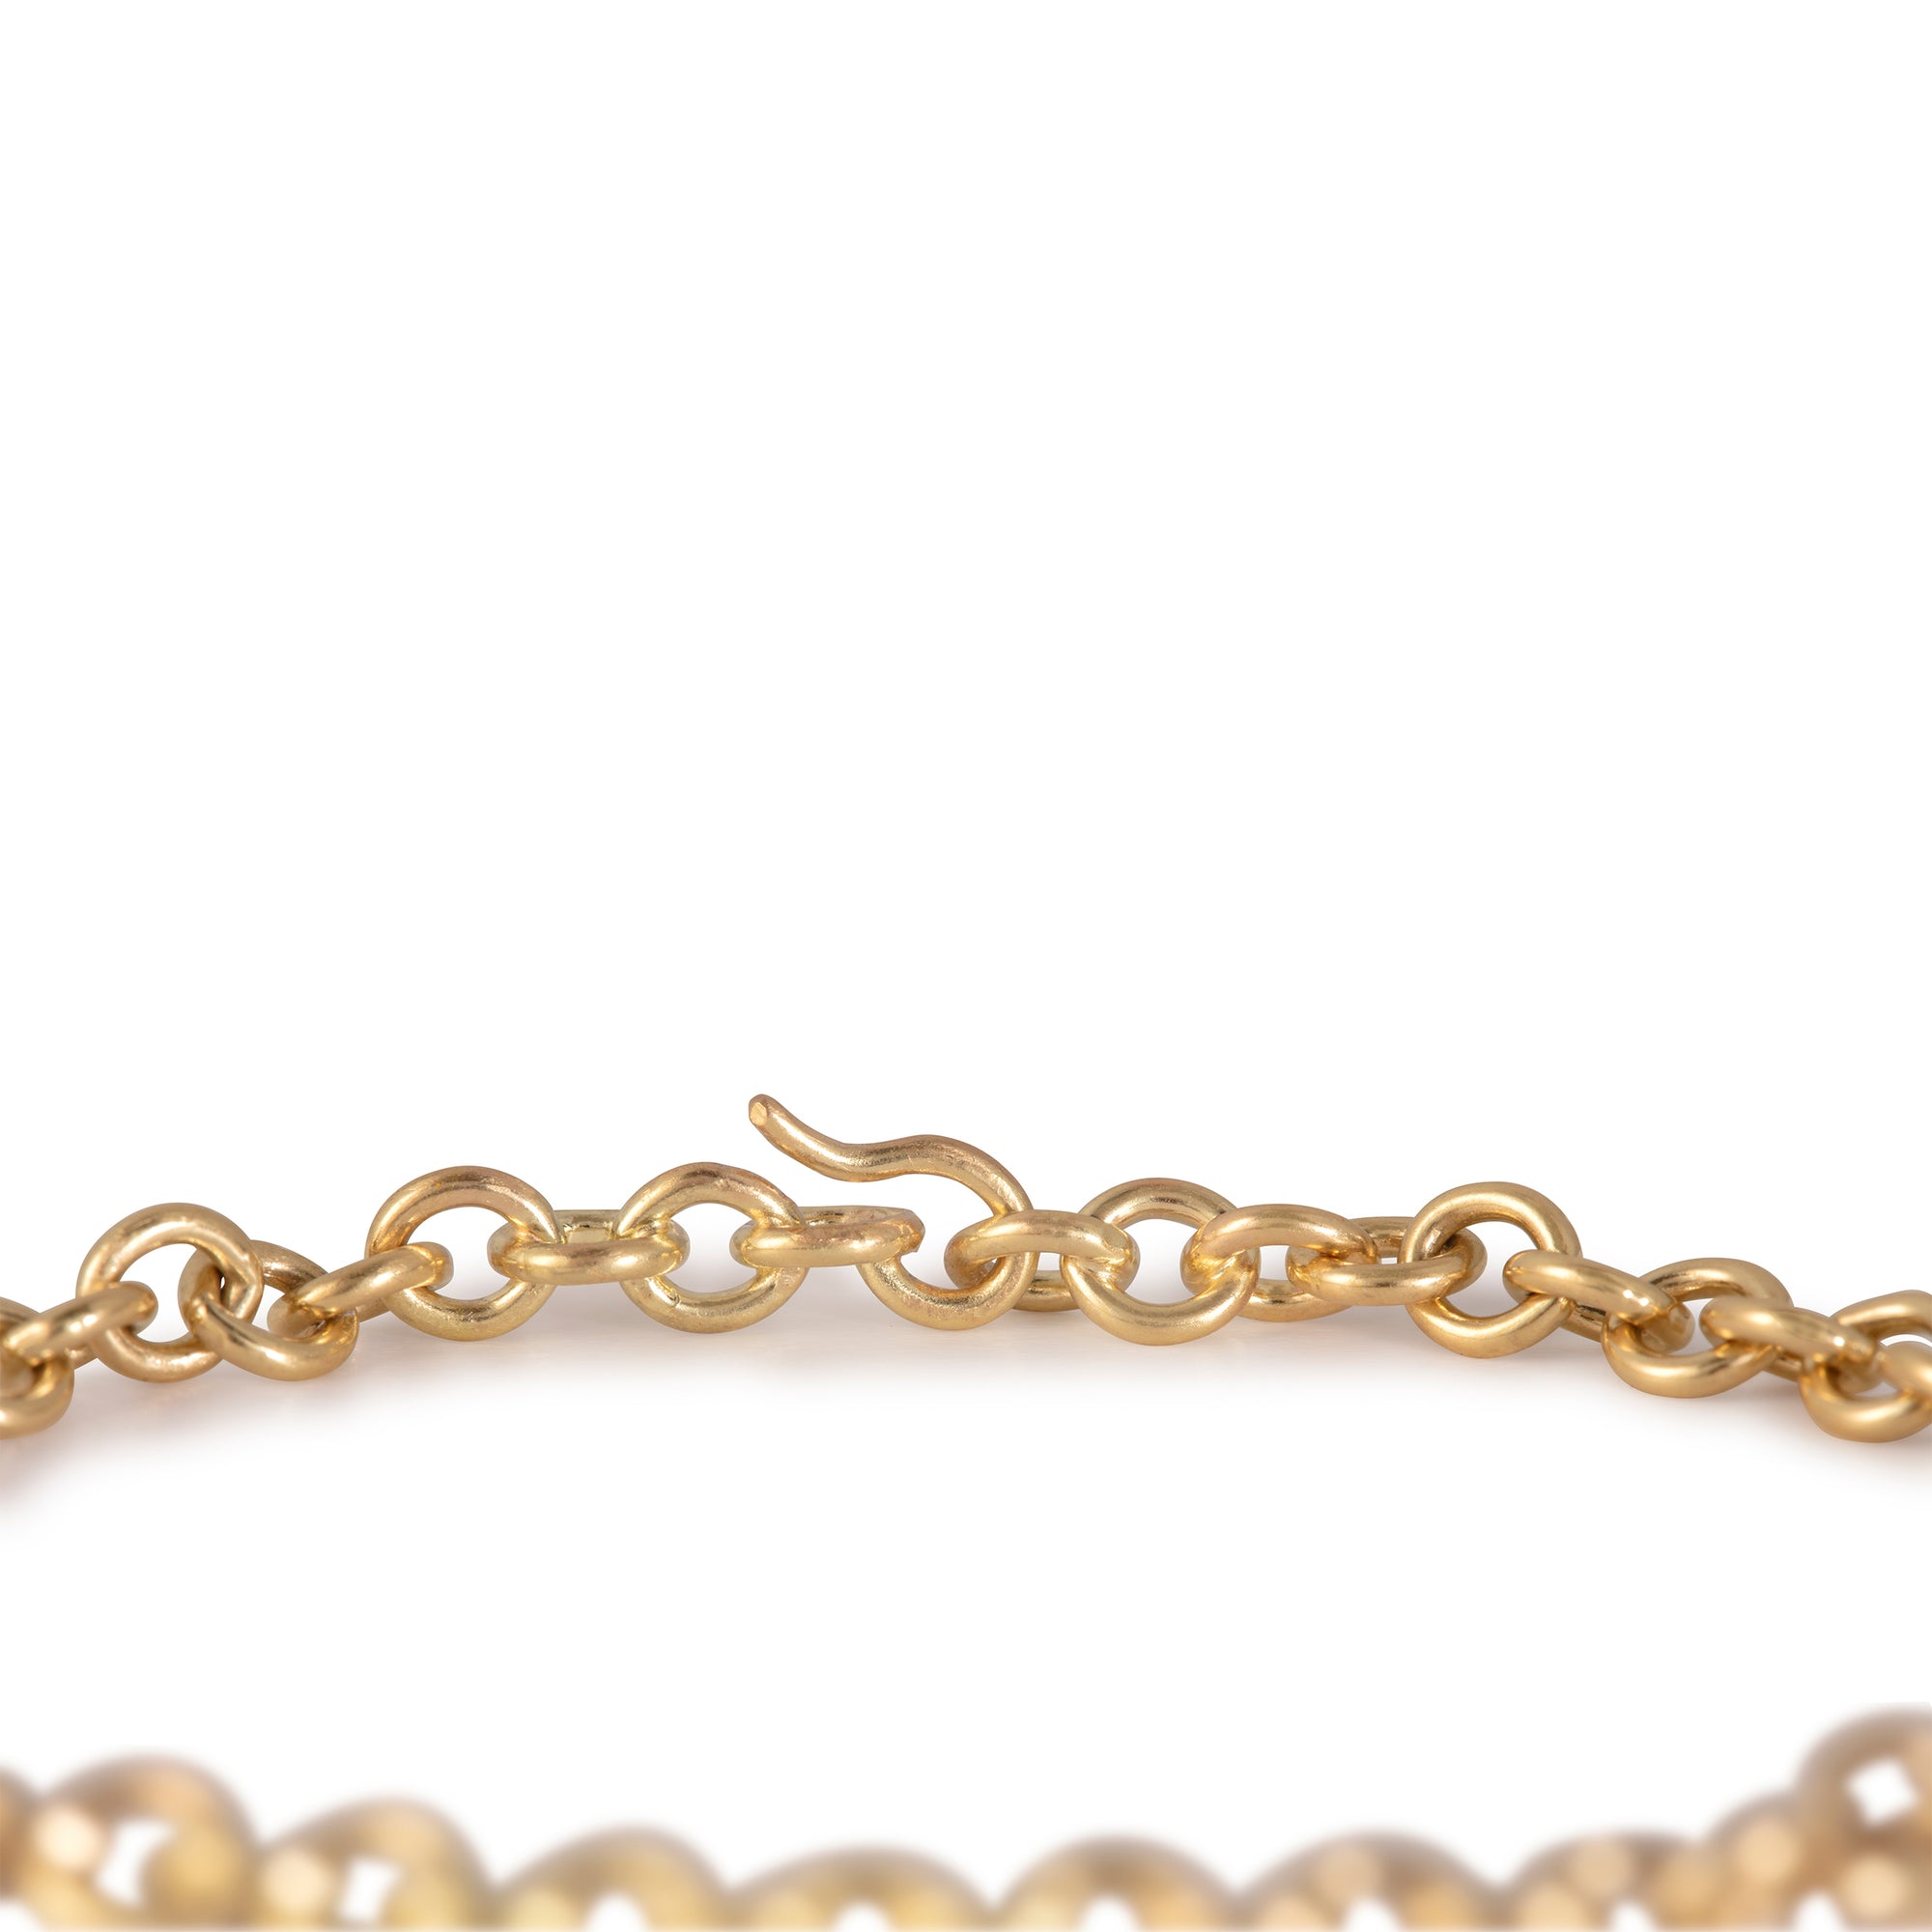    maya-selway-golden-thread-18ct-gold-necklace-detail